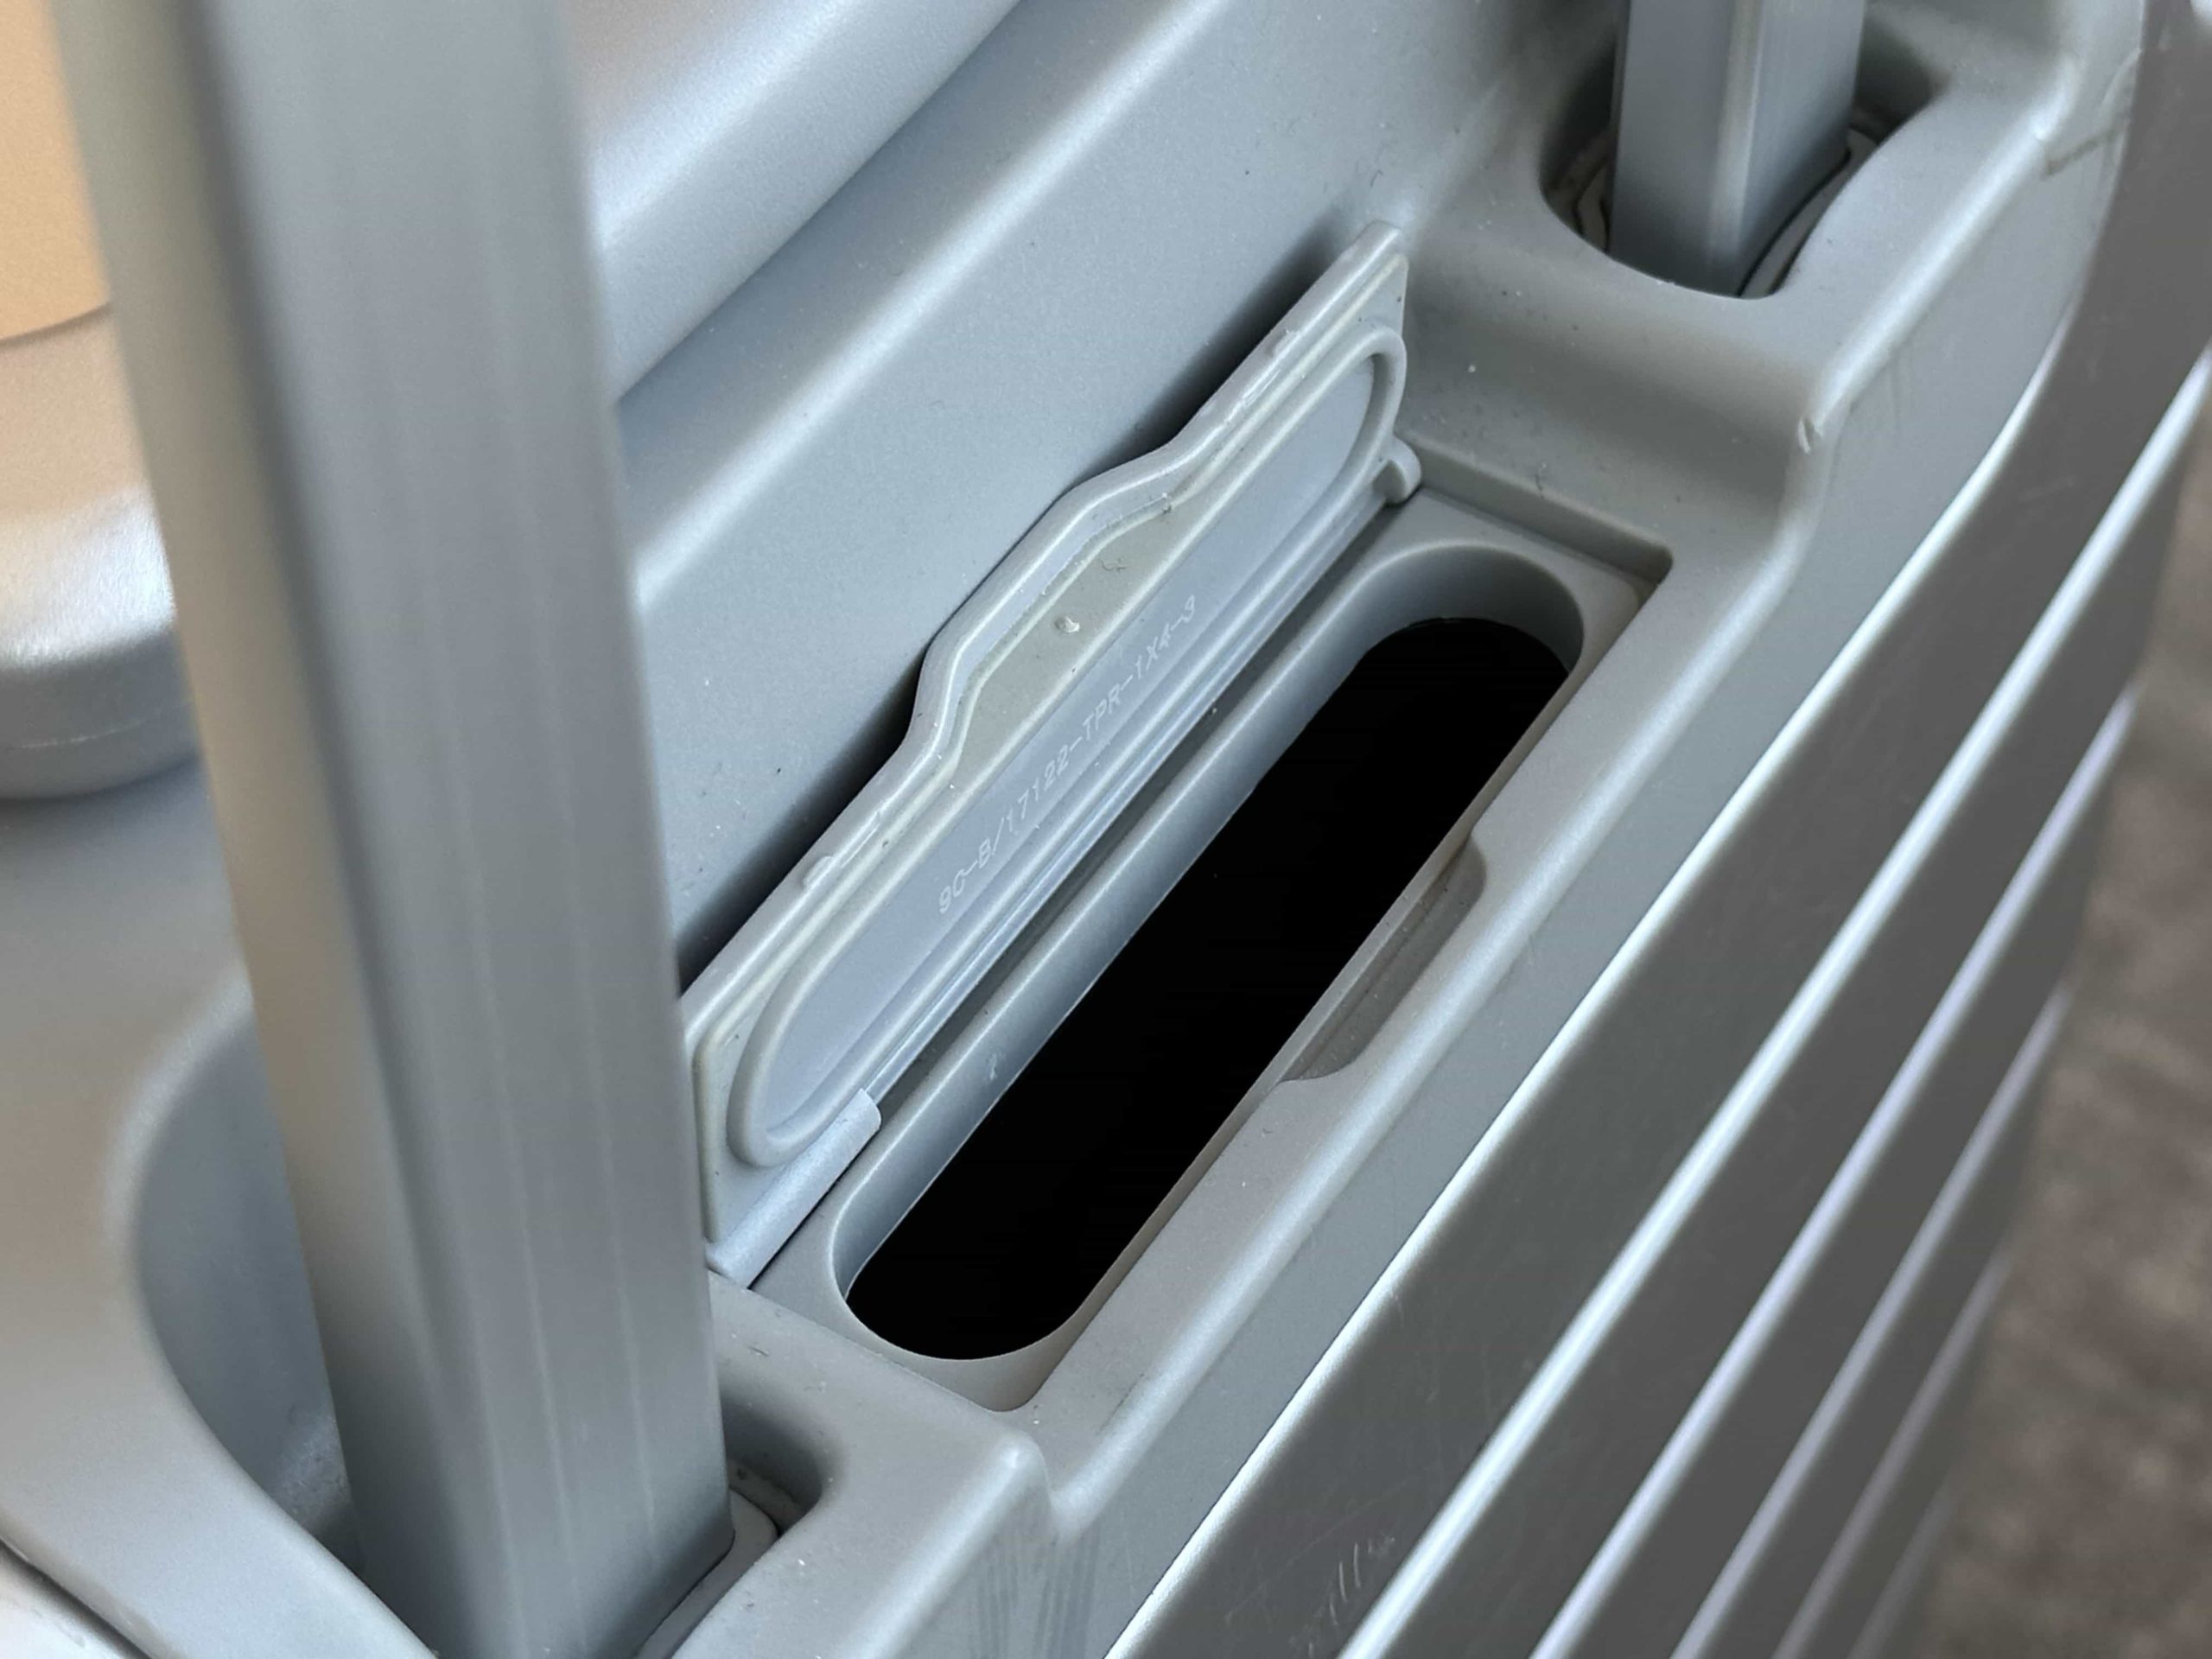 An open portable battery compartment door on a suitcase